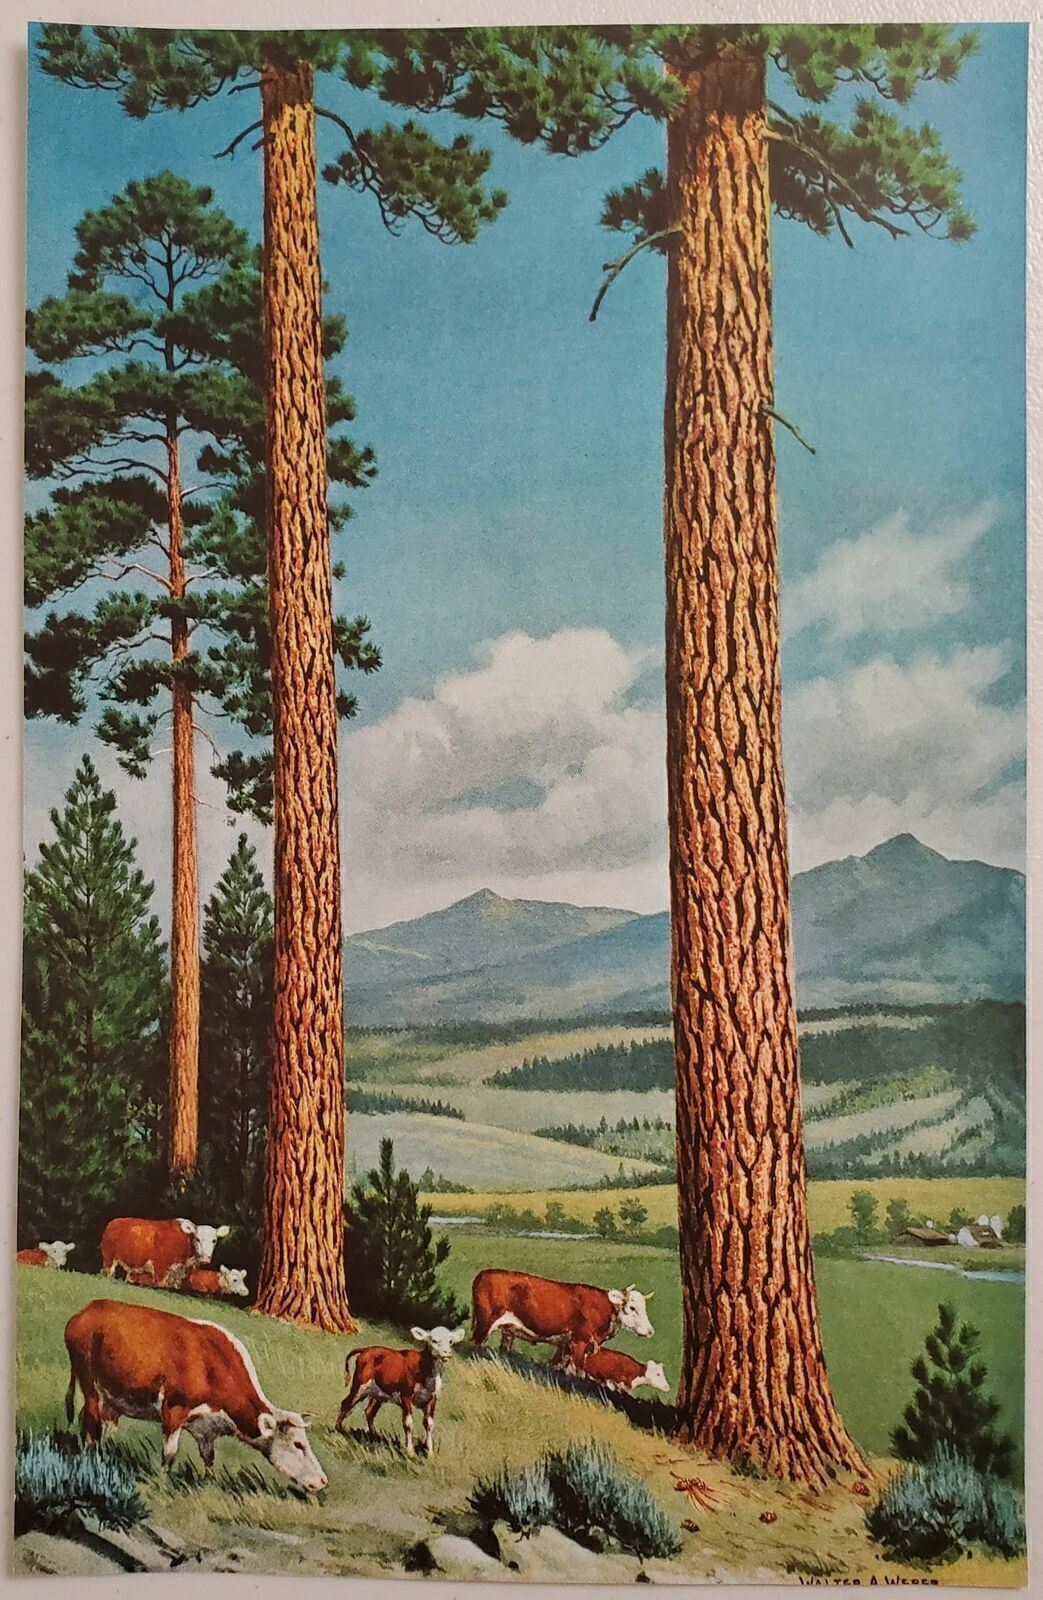 1955 Magazine Pictures 6 Paintings of Trees by Walter A. Weber